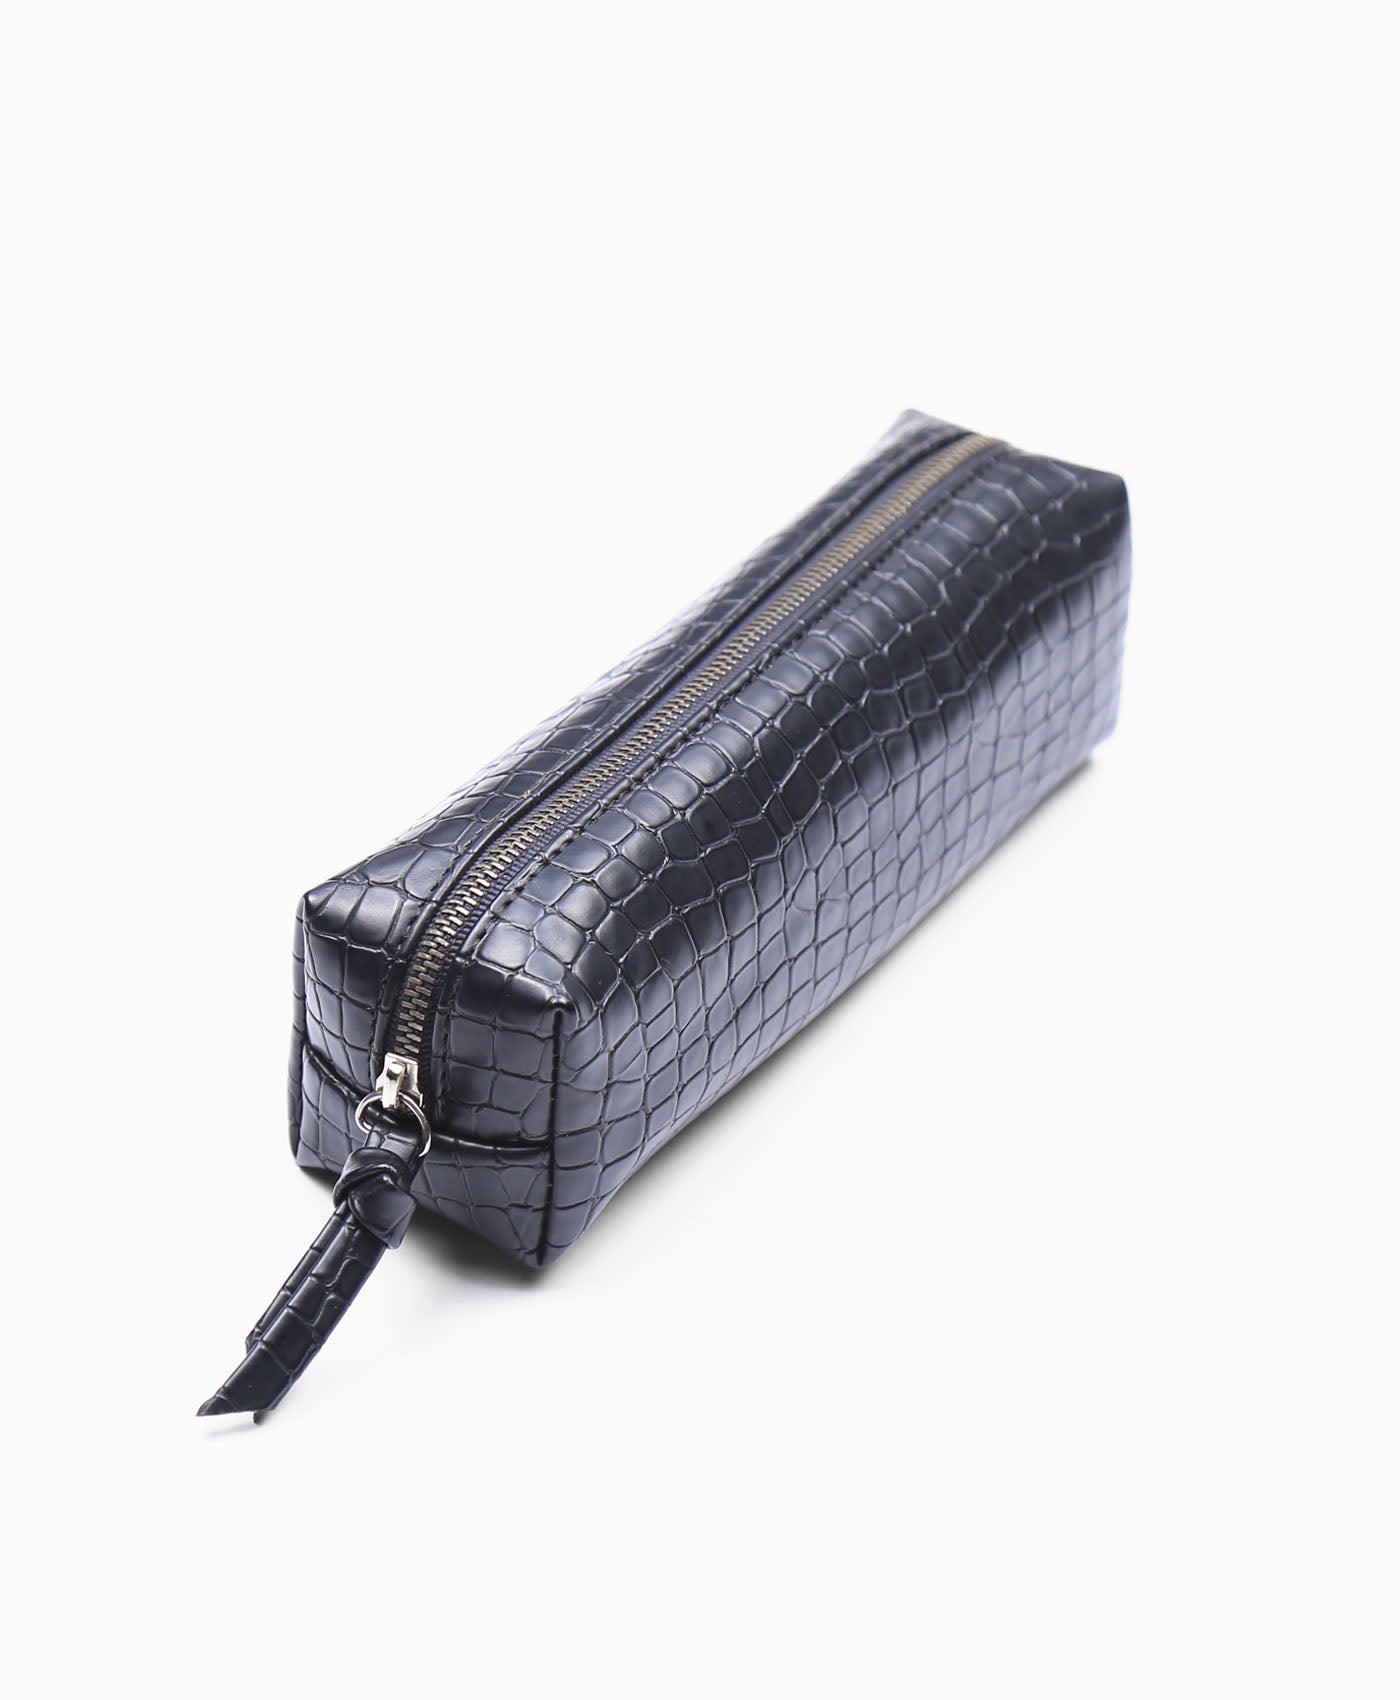 A Little Lovely Company Pencil Case - Crocodiles » Fast Shipping